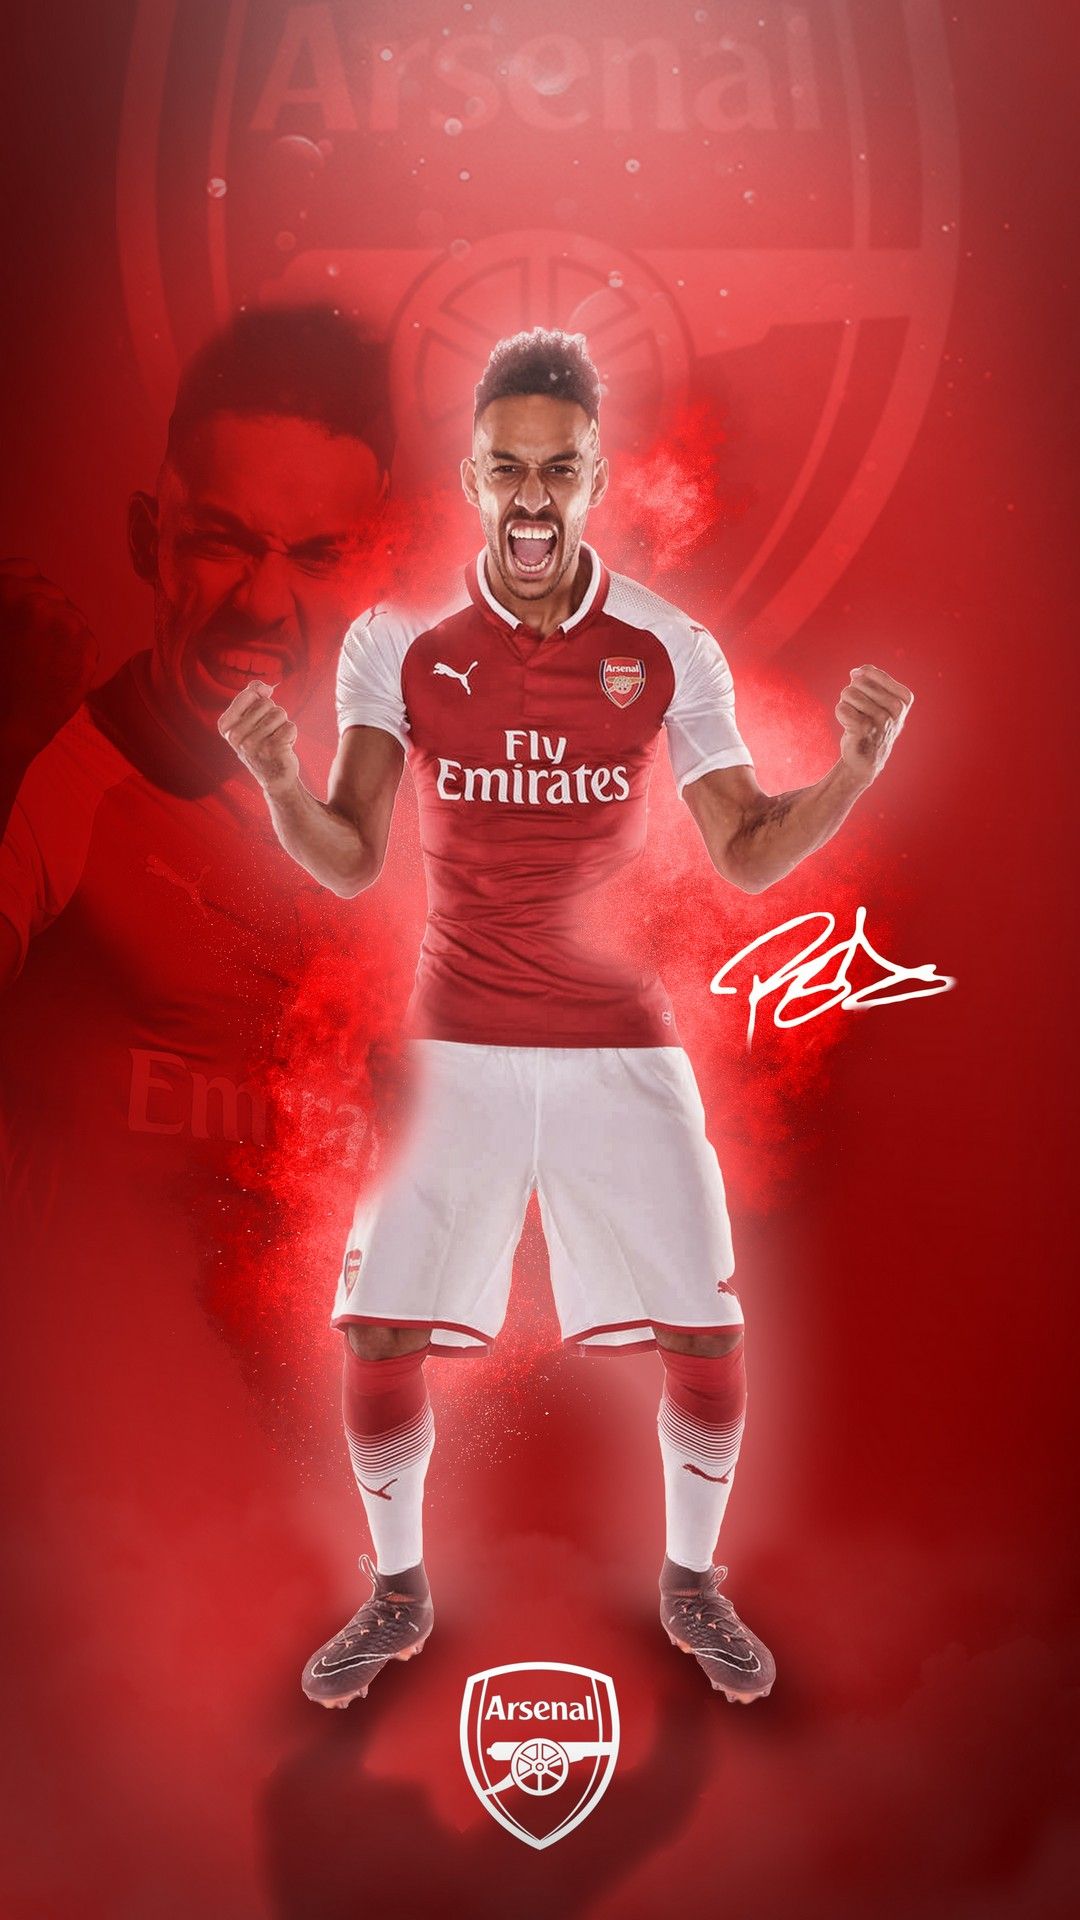 arsenal wallpaper,red,football autographed paraphernalia,sports collectible,autographed sports paraphernalia,football player